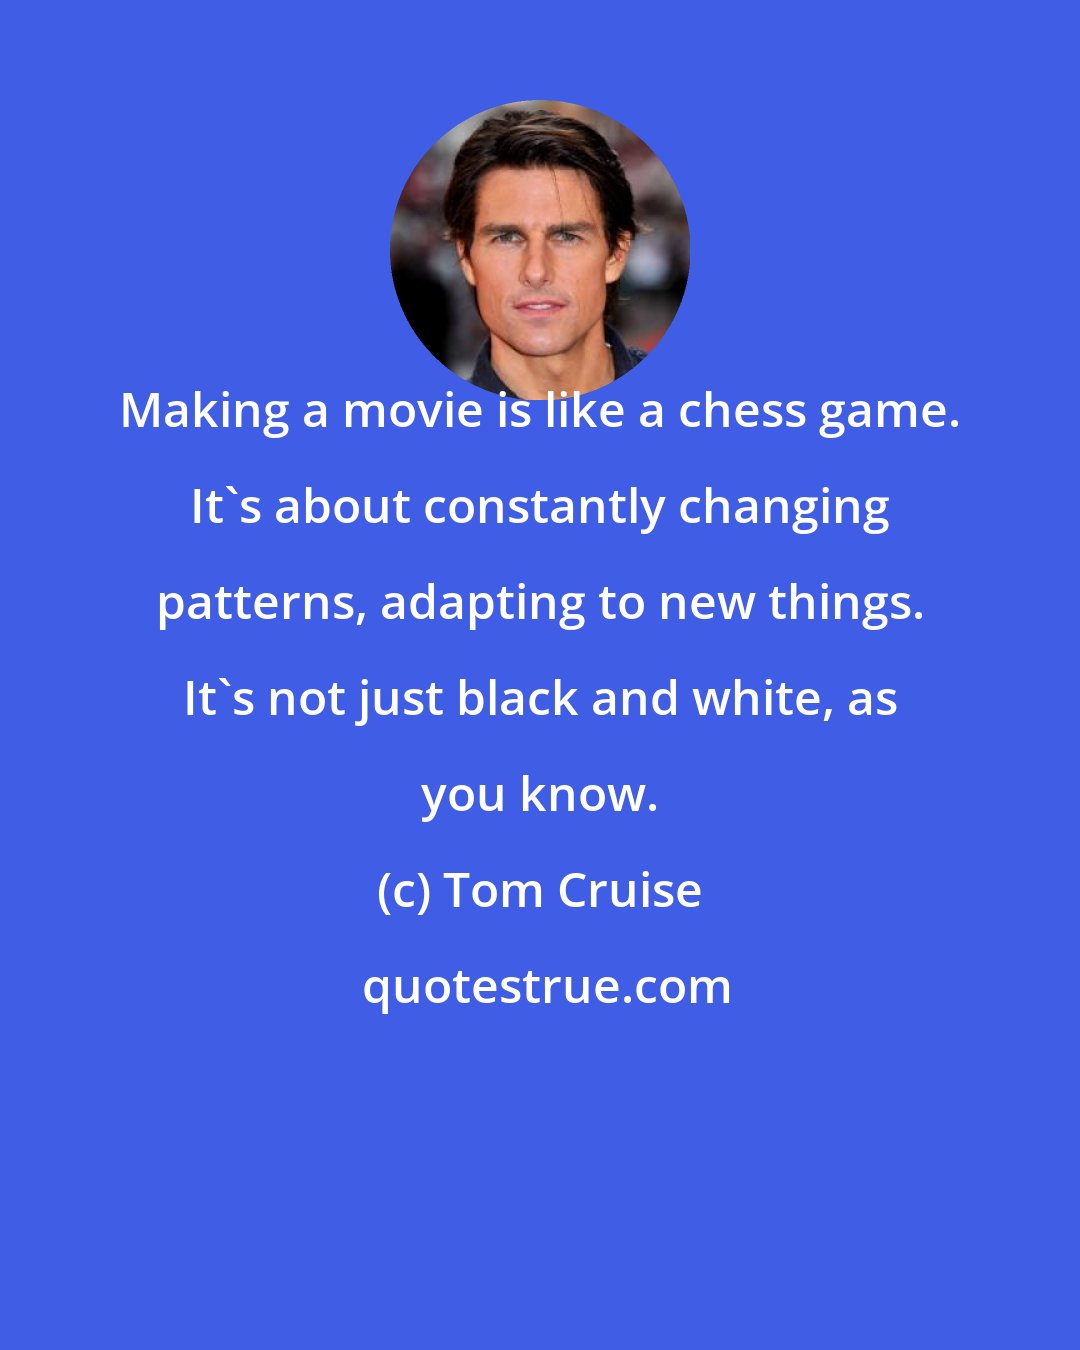 Tom Cruise: Making a movie is like a chess game. It's about constantly changing patterns, adapting to new things. It's not just black and white, as you know.